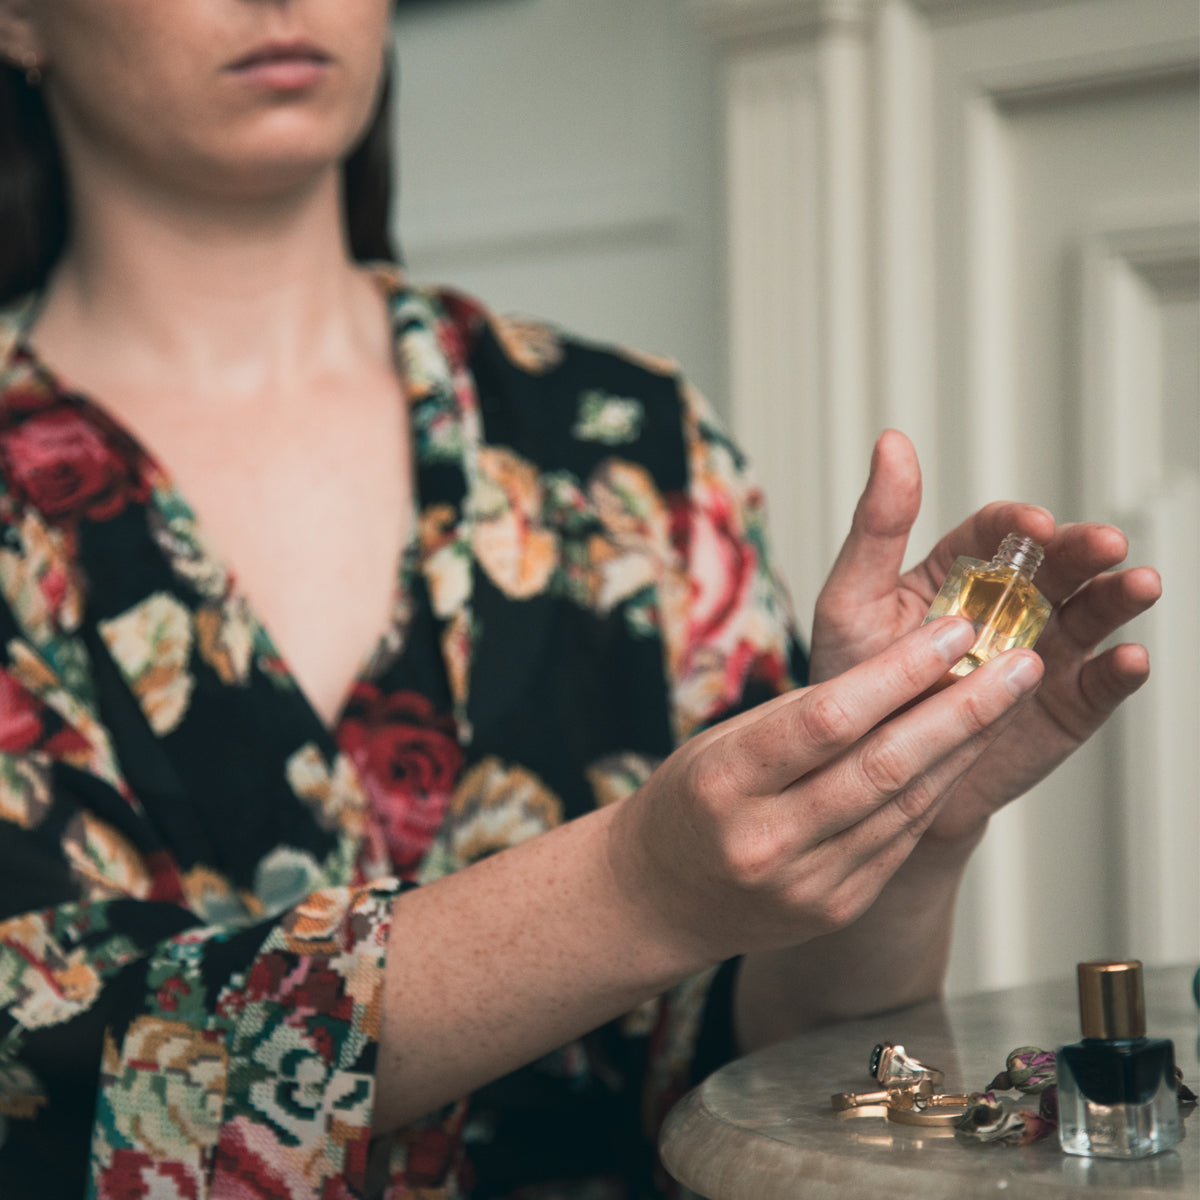 model using finger to dab jasmine perfume out of bottle